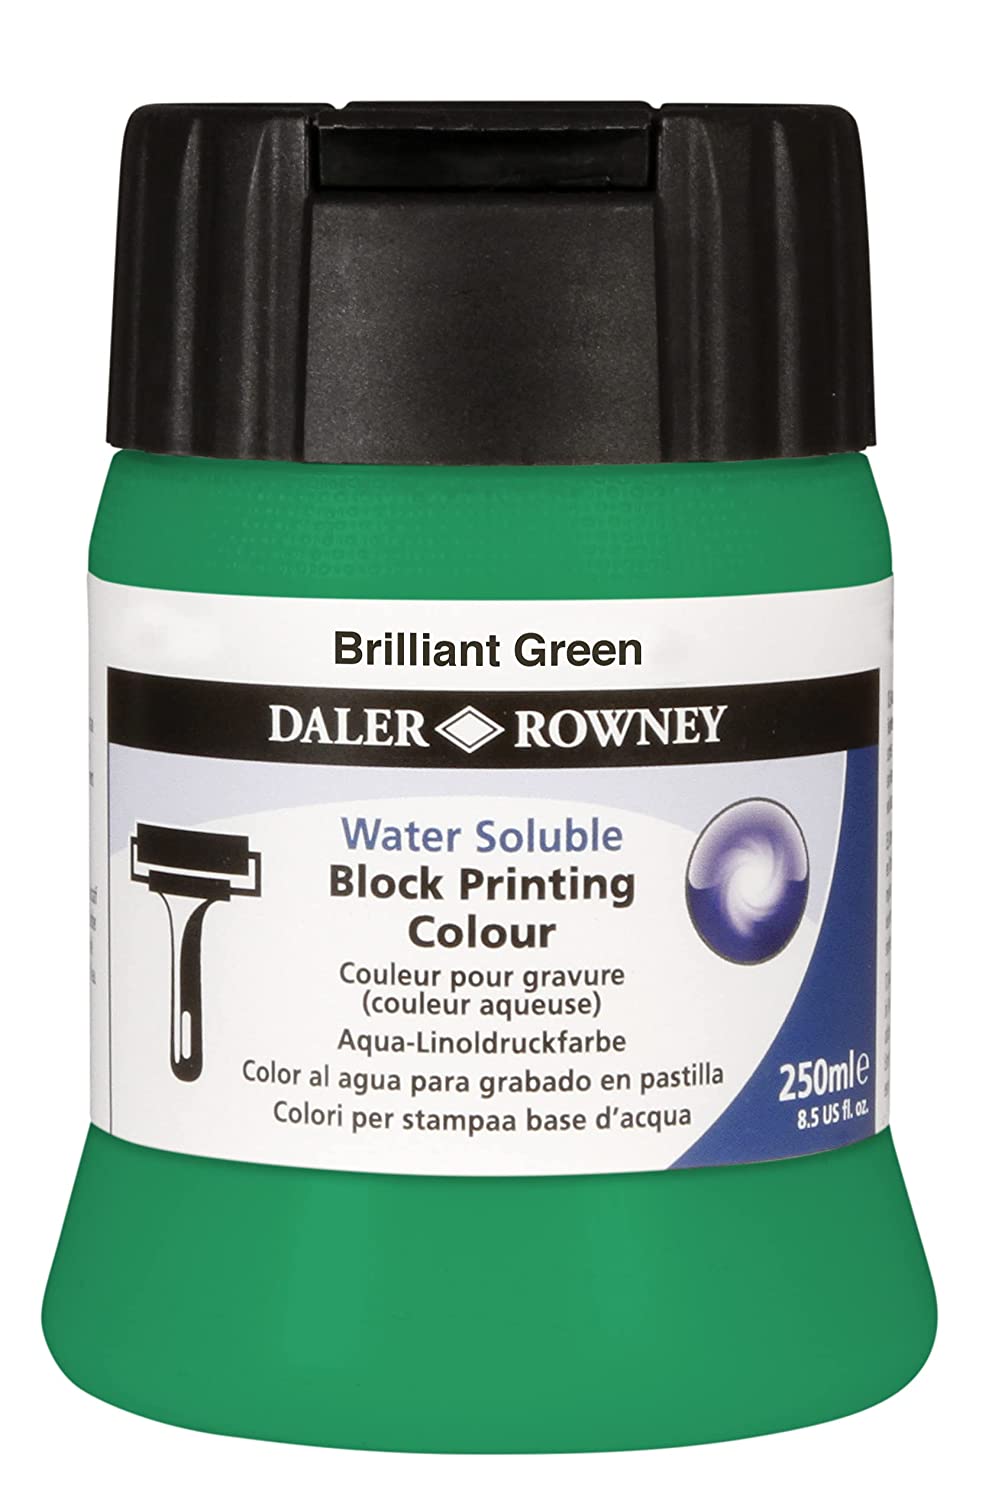 Daler-Rowney Water Soluble Block Printing Colour